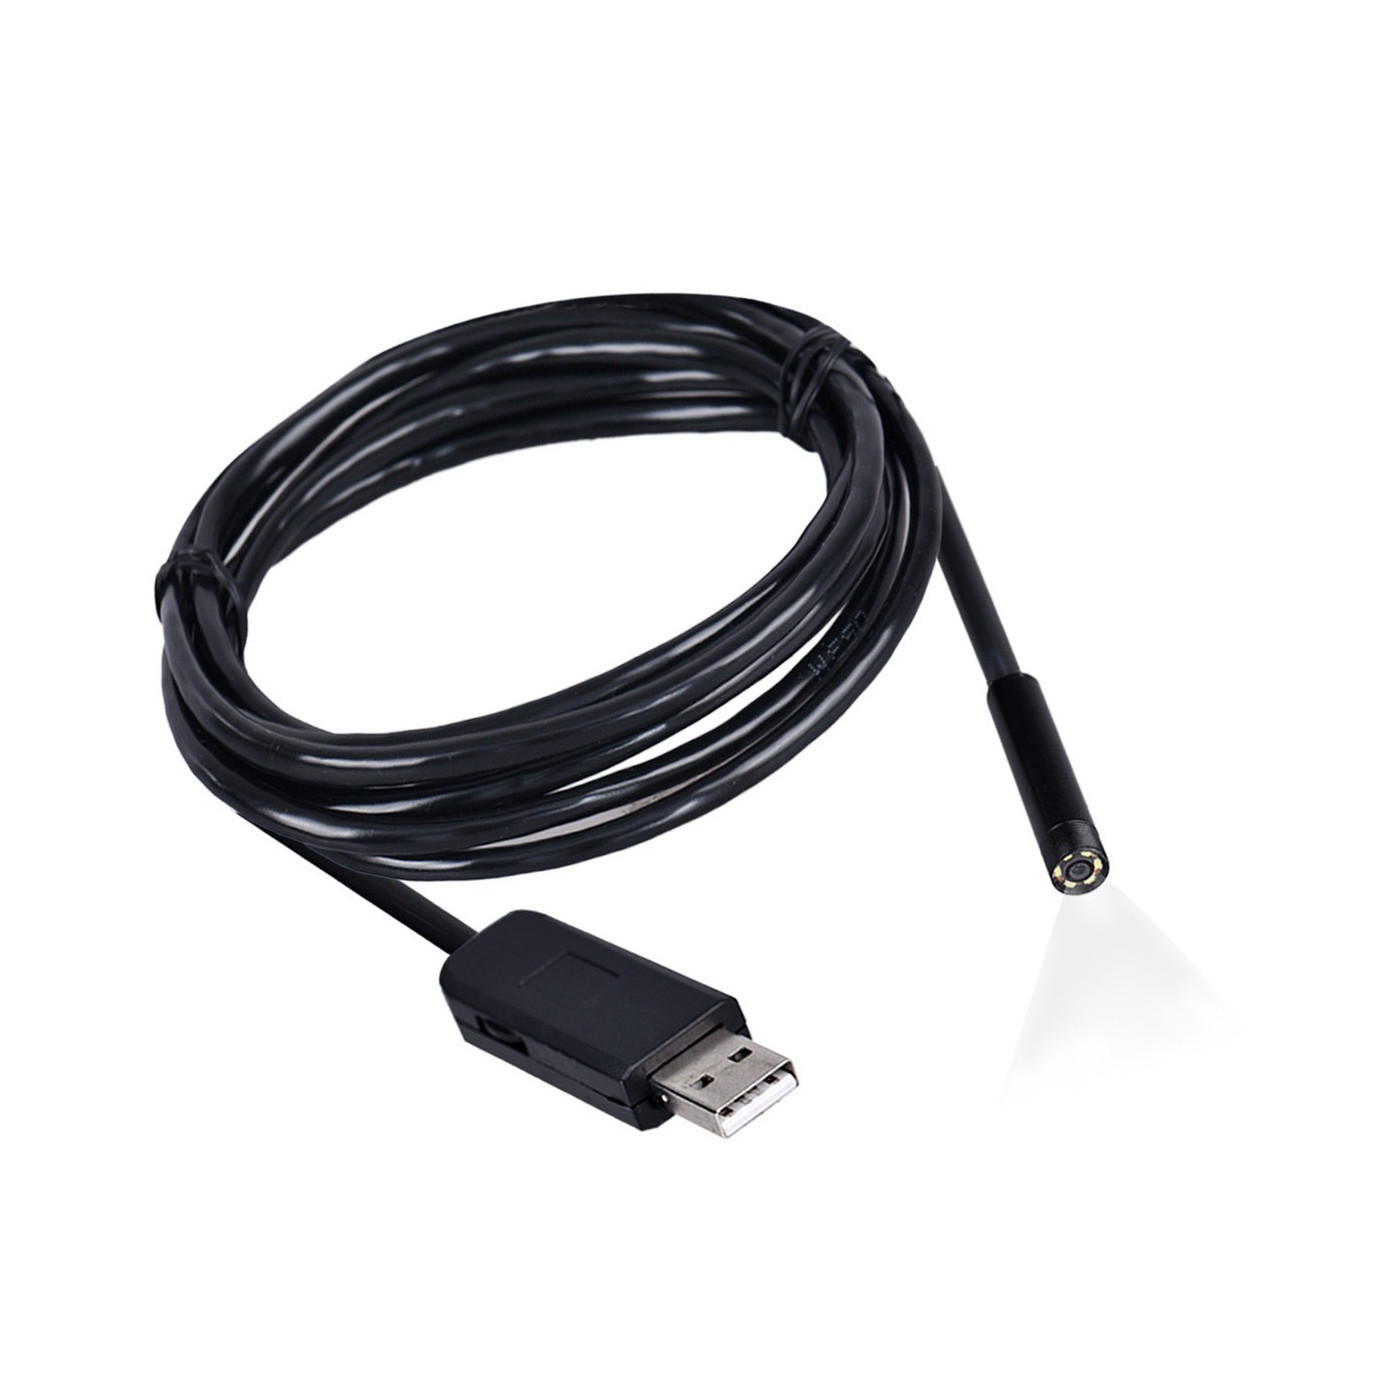 Basic USB endoscope camera, 2 meters cable